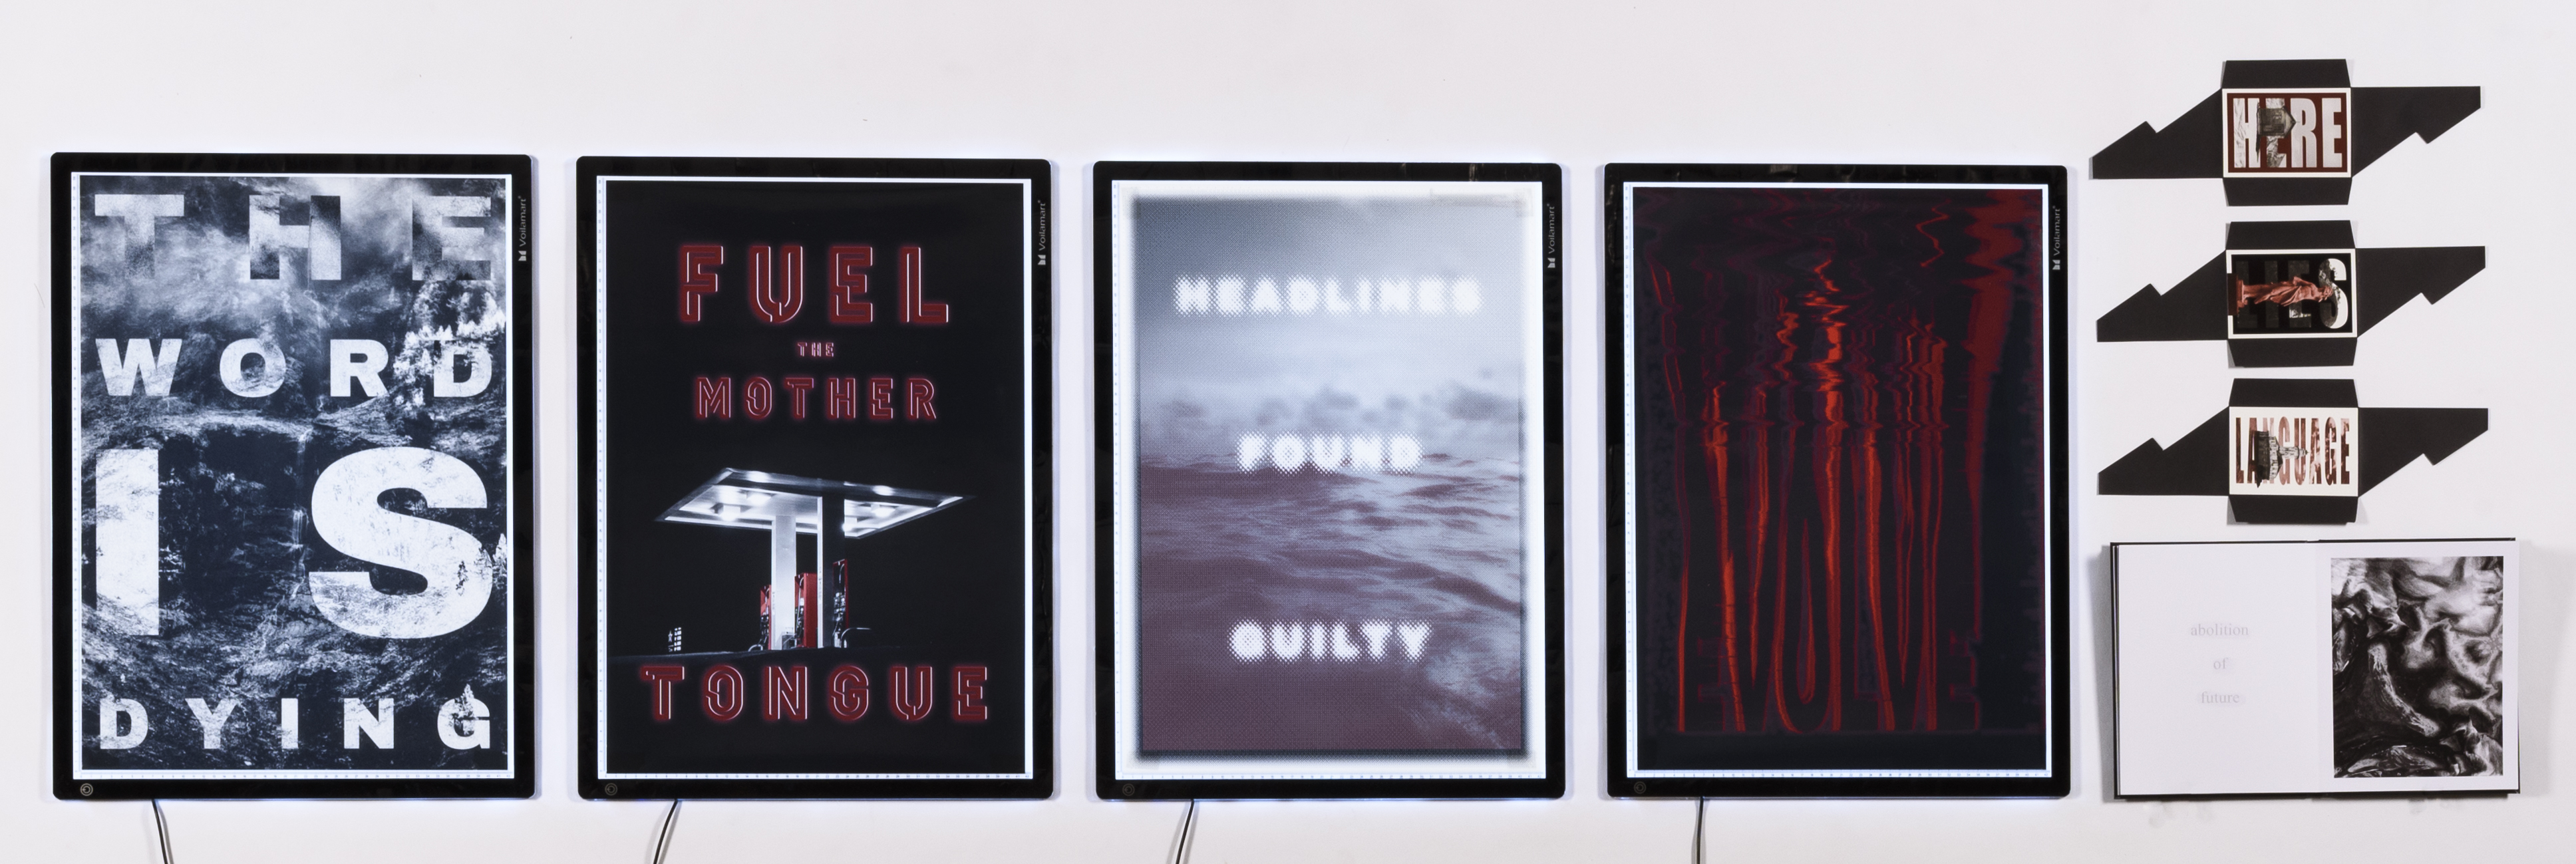 Four light boxes showing text based graphic design works accompanied by four smaller works on paper.